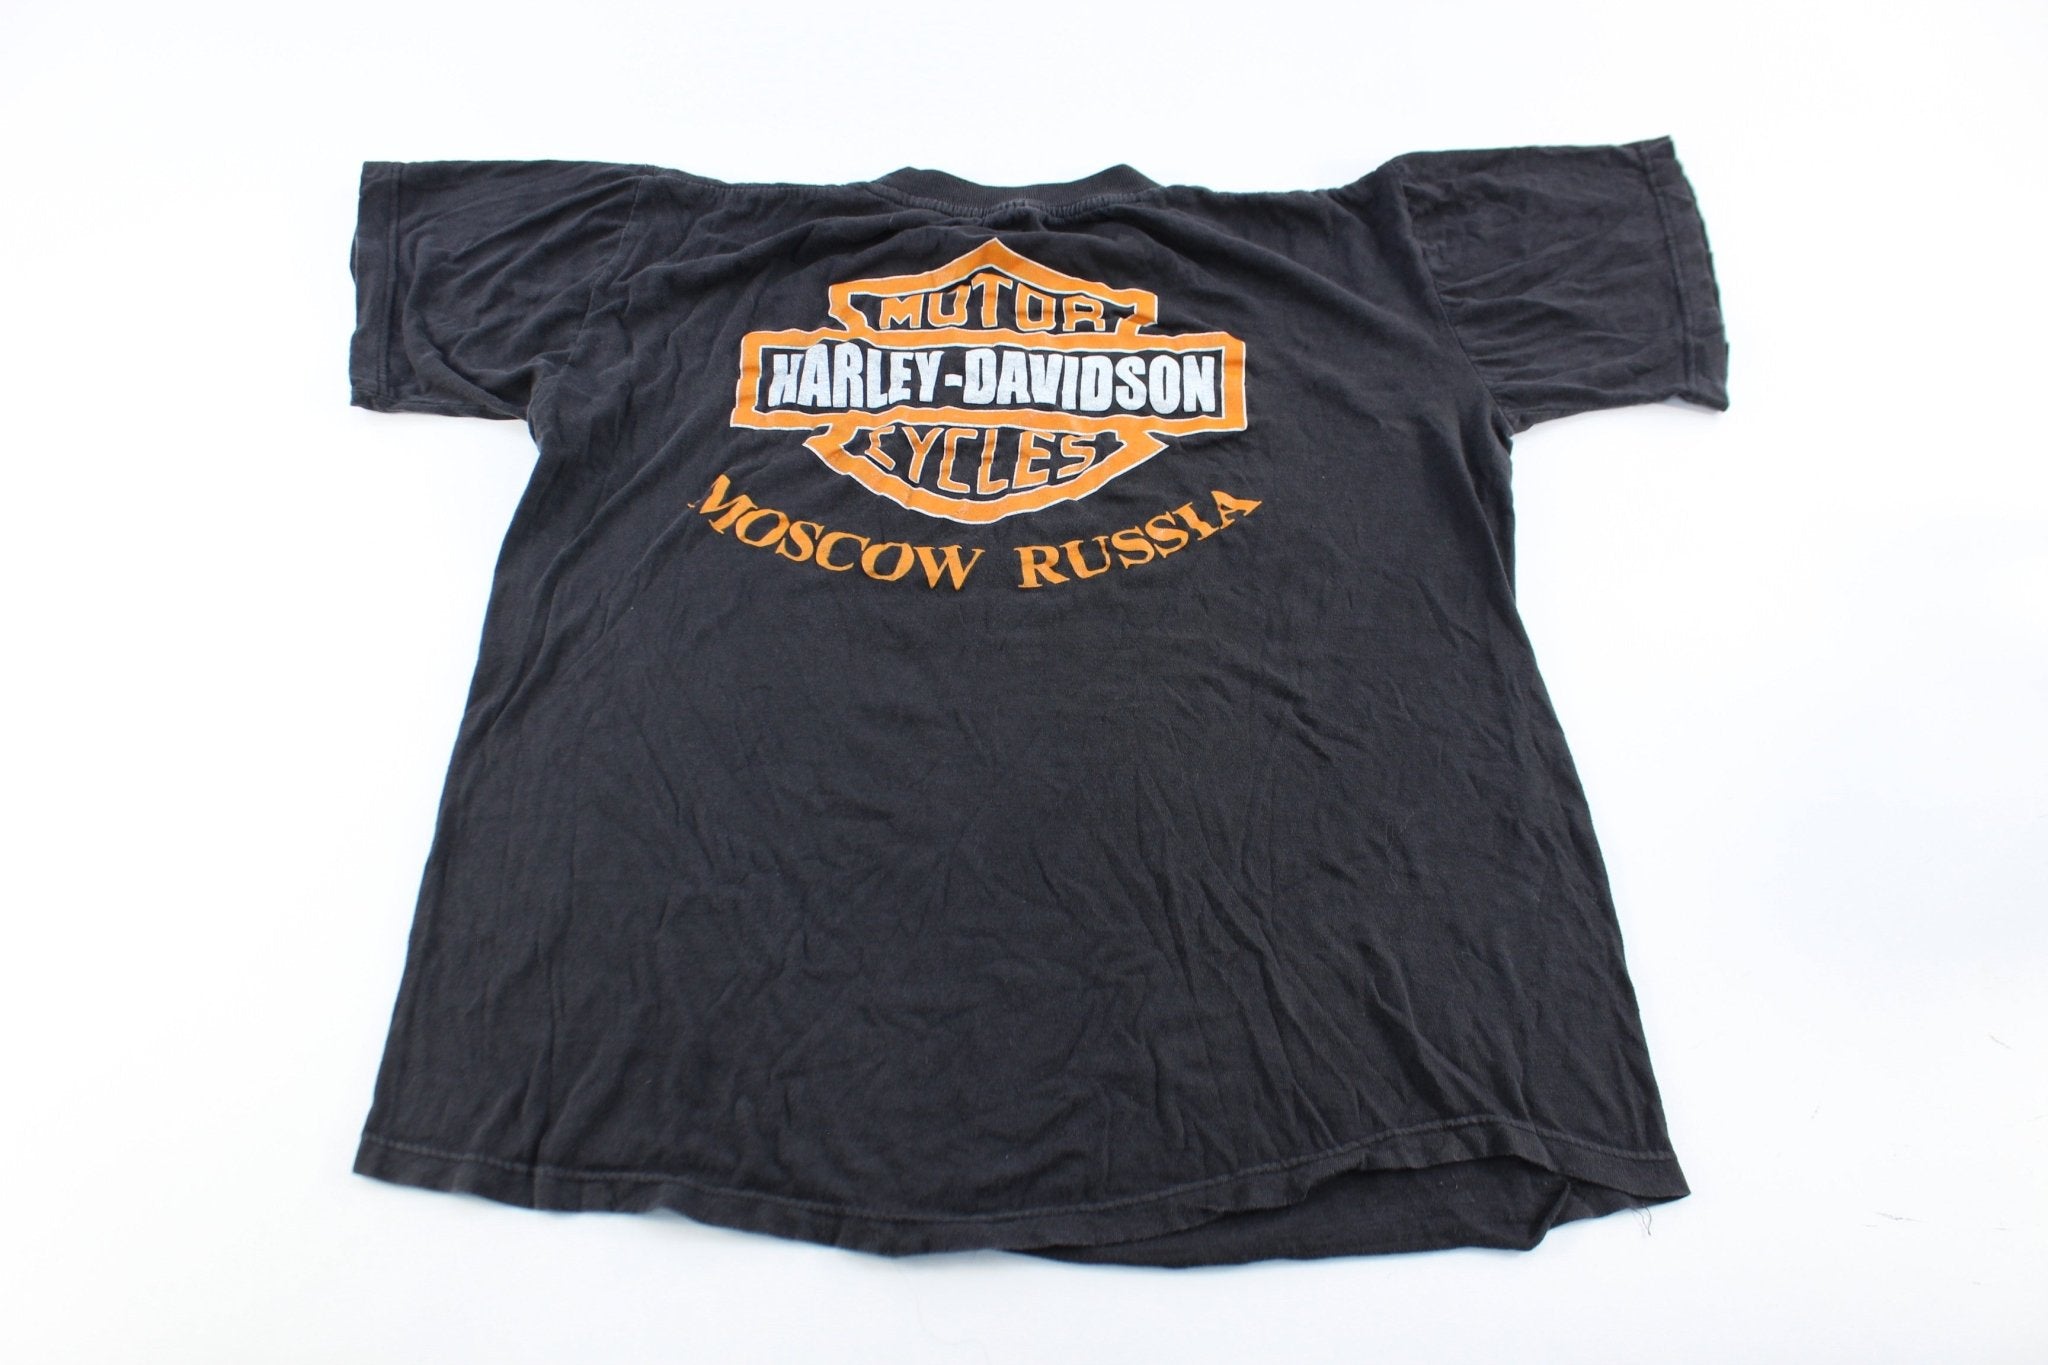 Harley Davidson Motorcycles Moscow, Russia T-Shirt - ThriftedThreads.com